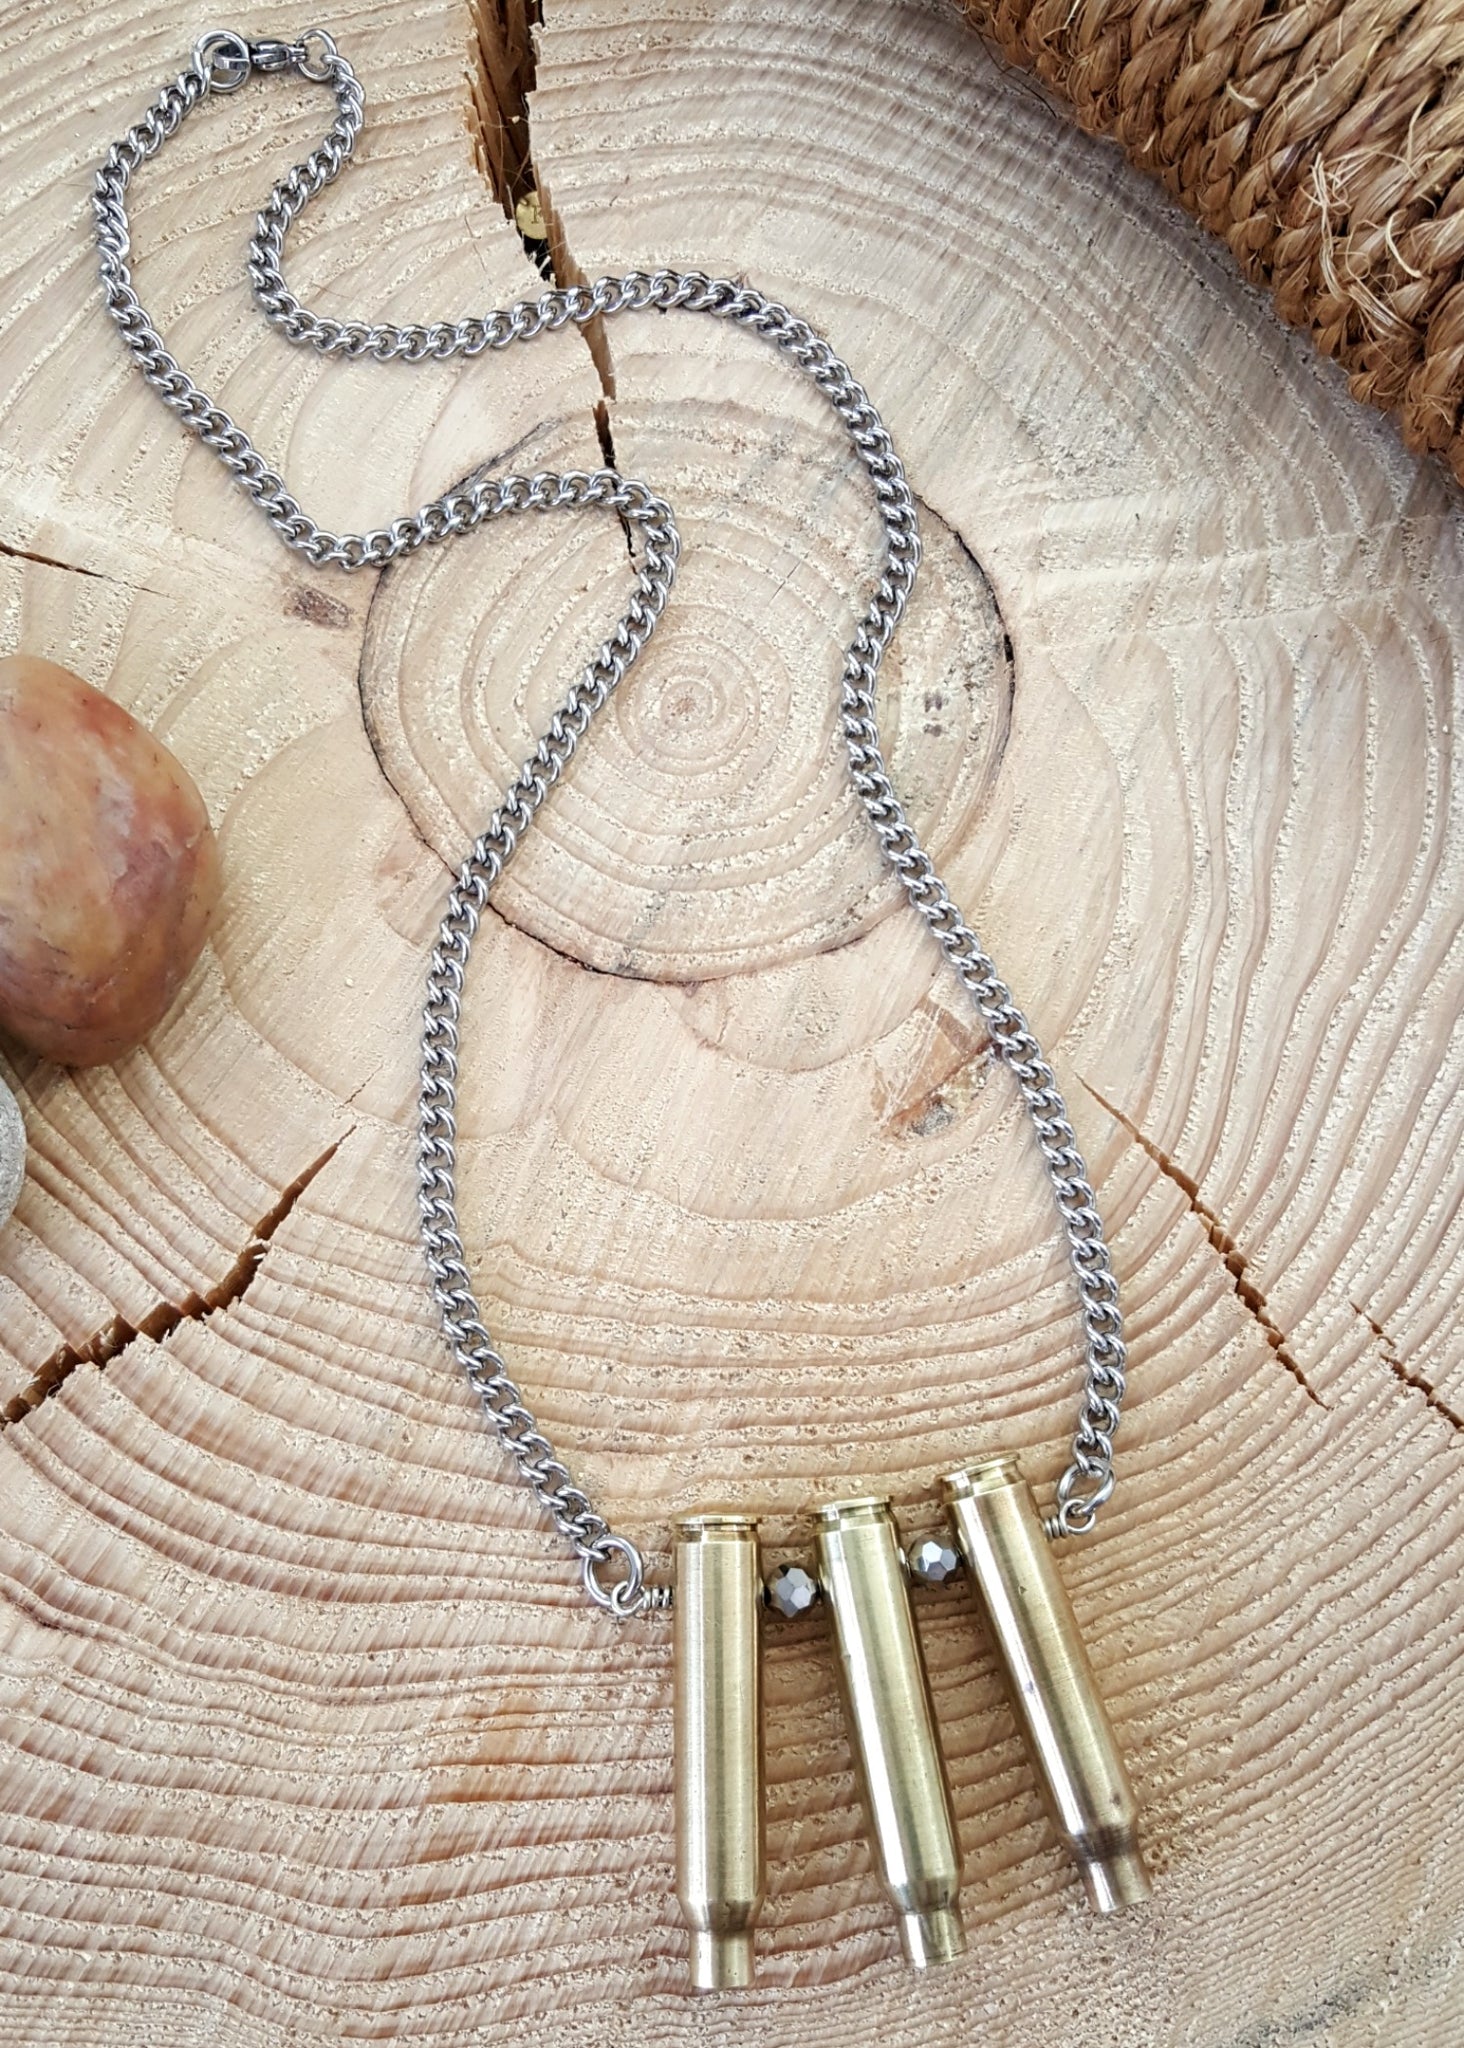 Triple Threat .223 Rifle Casing Bullet Necklace – SureShot Jewelry